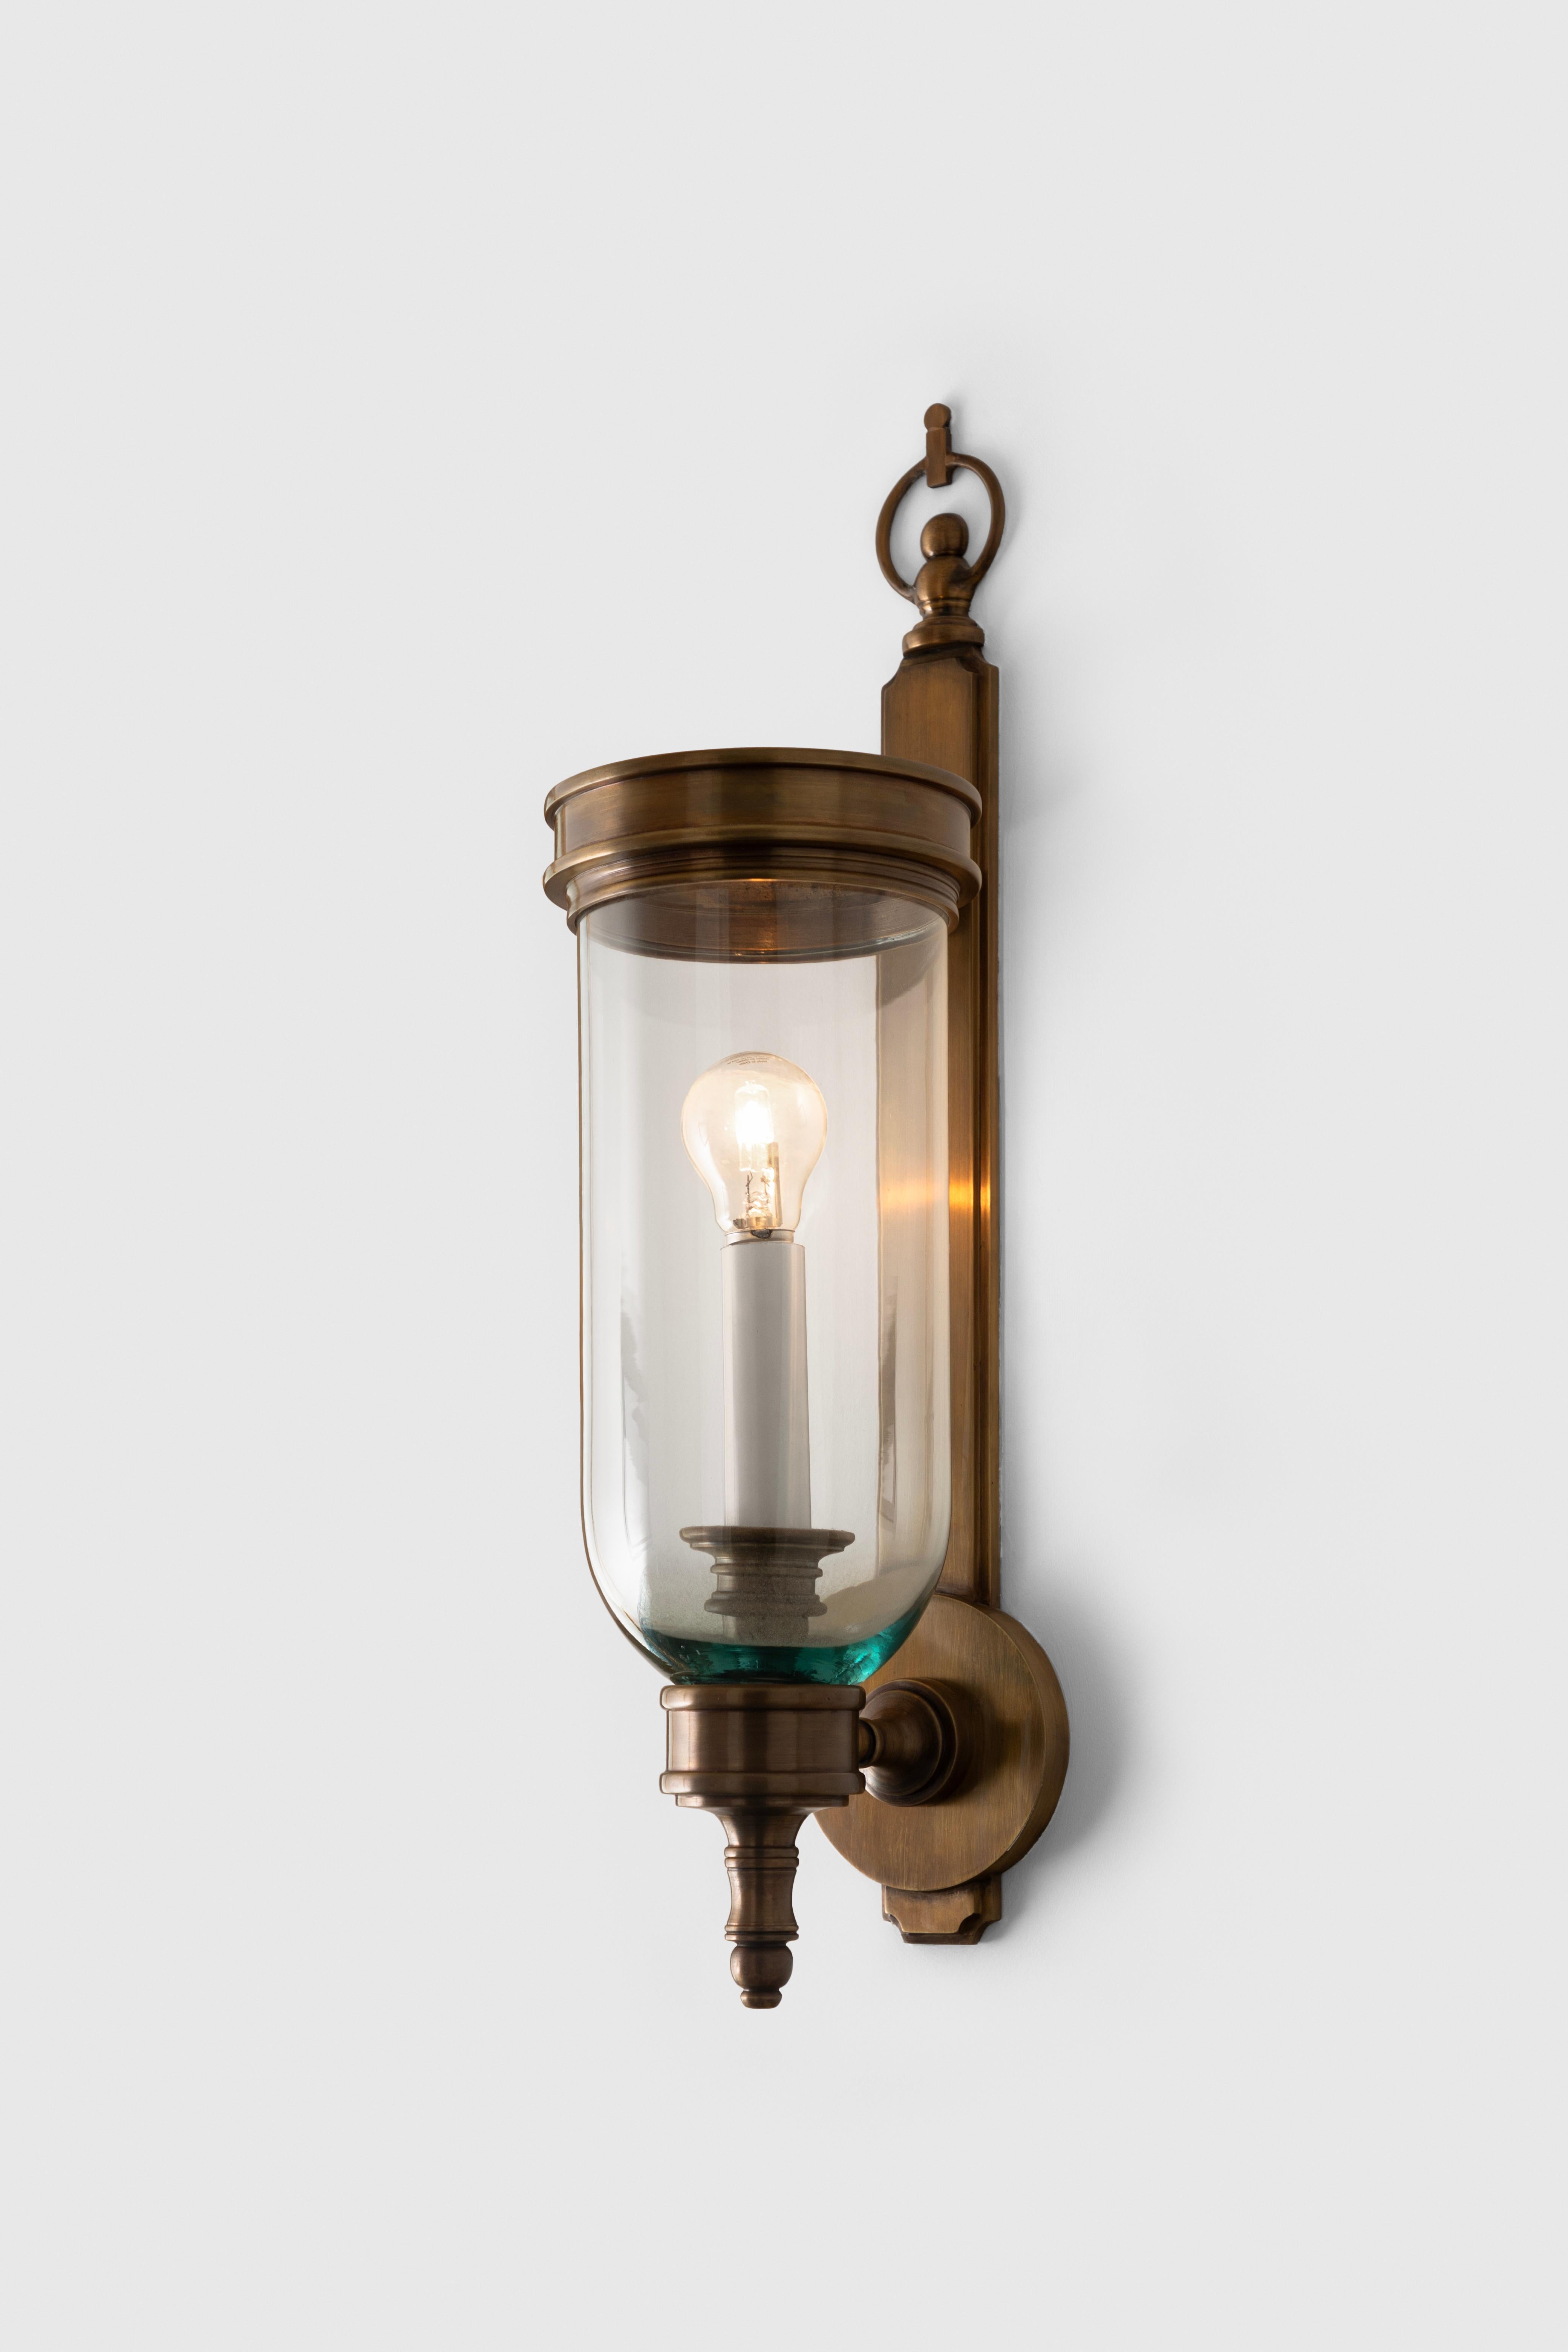 Cylindric shape sconce made out of brass and capello glass